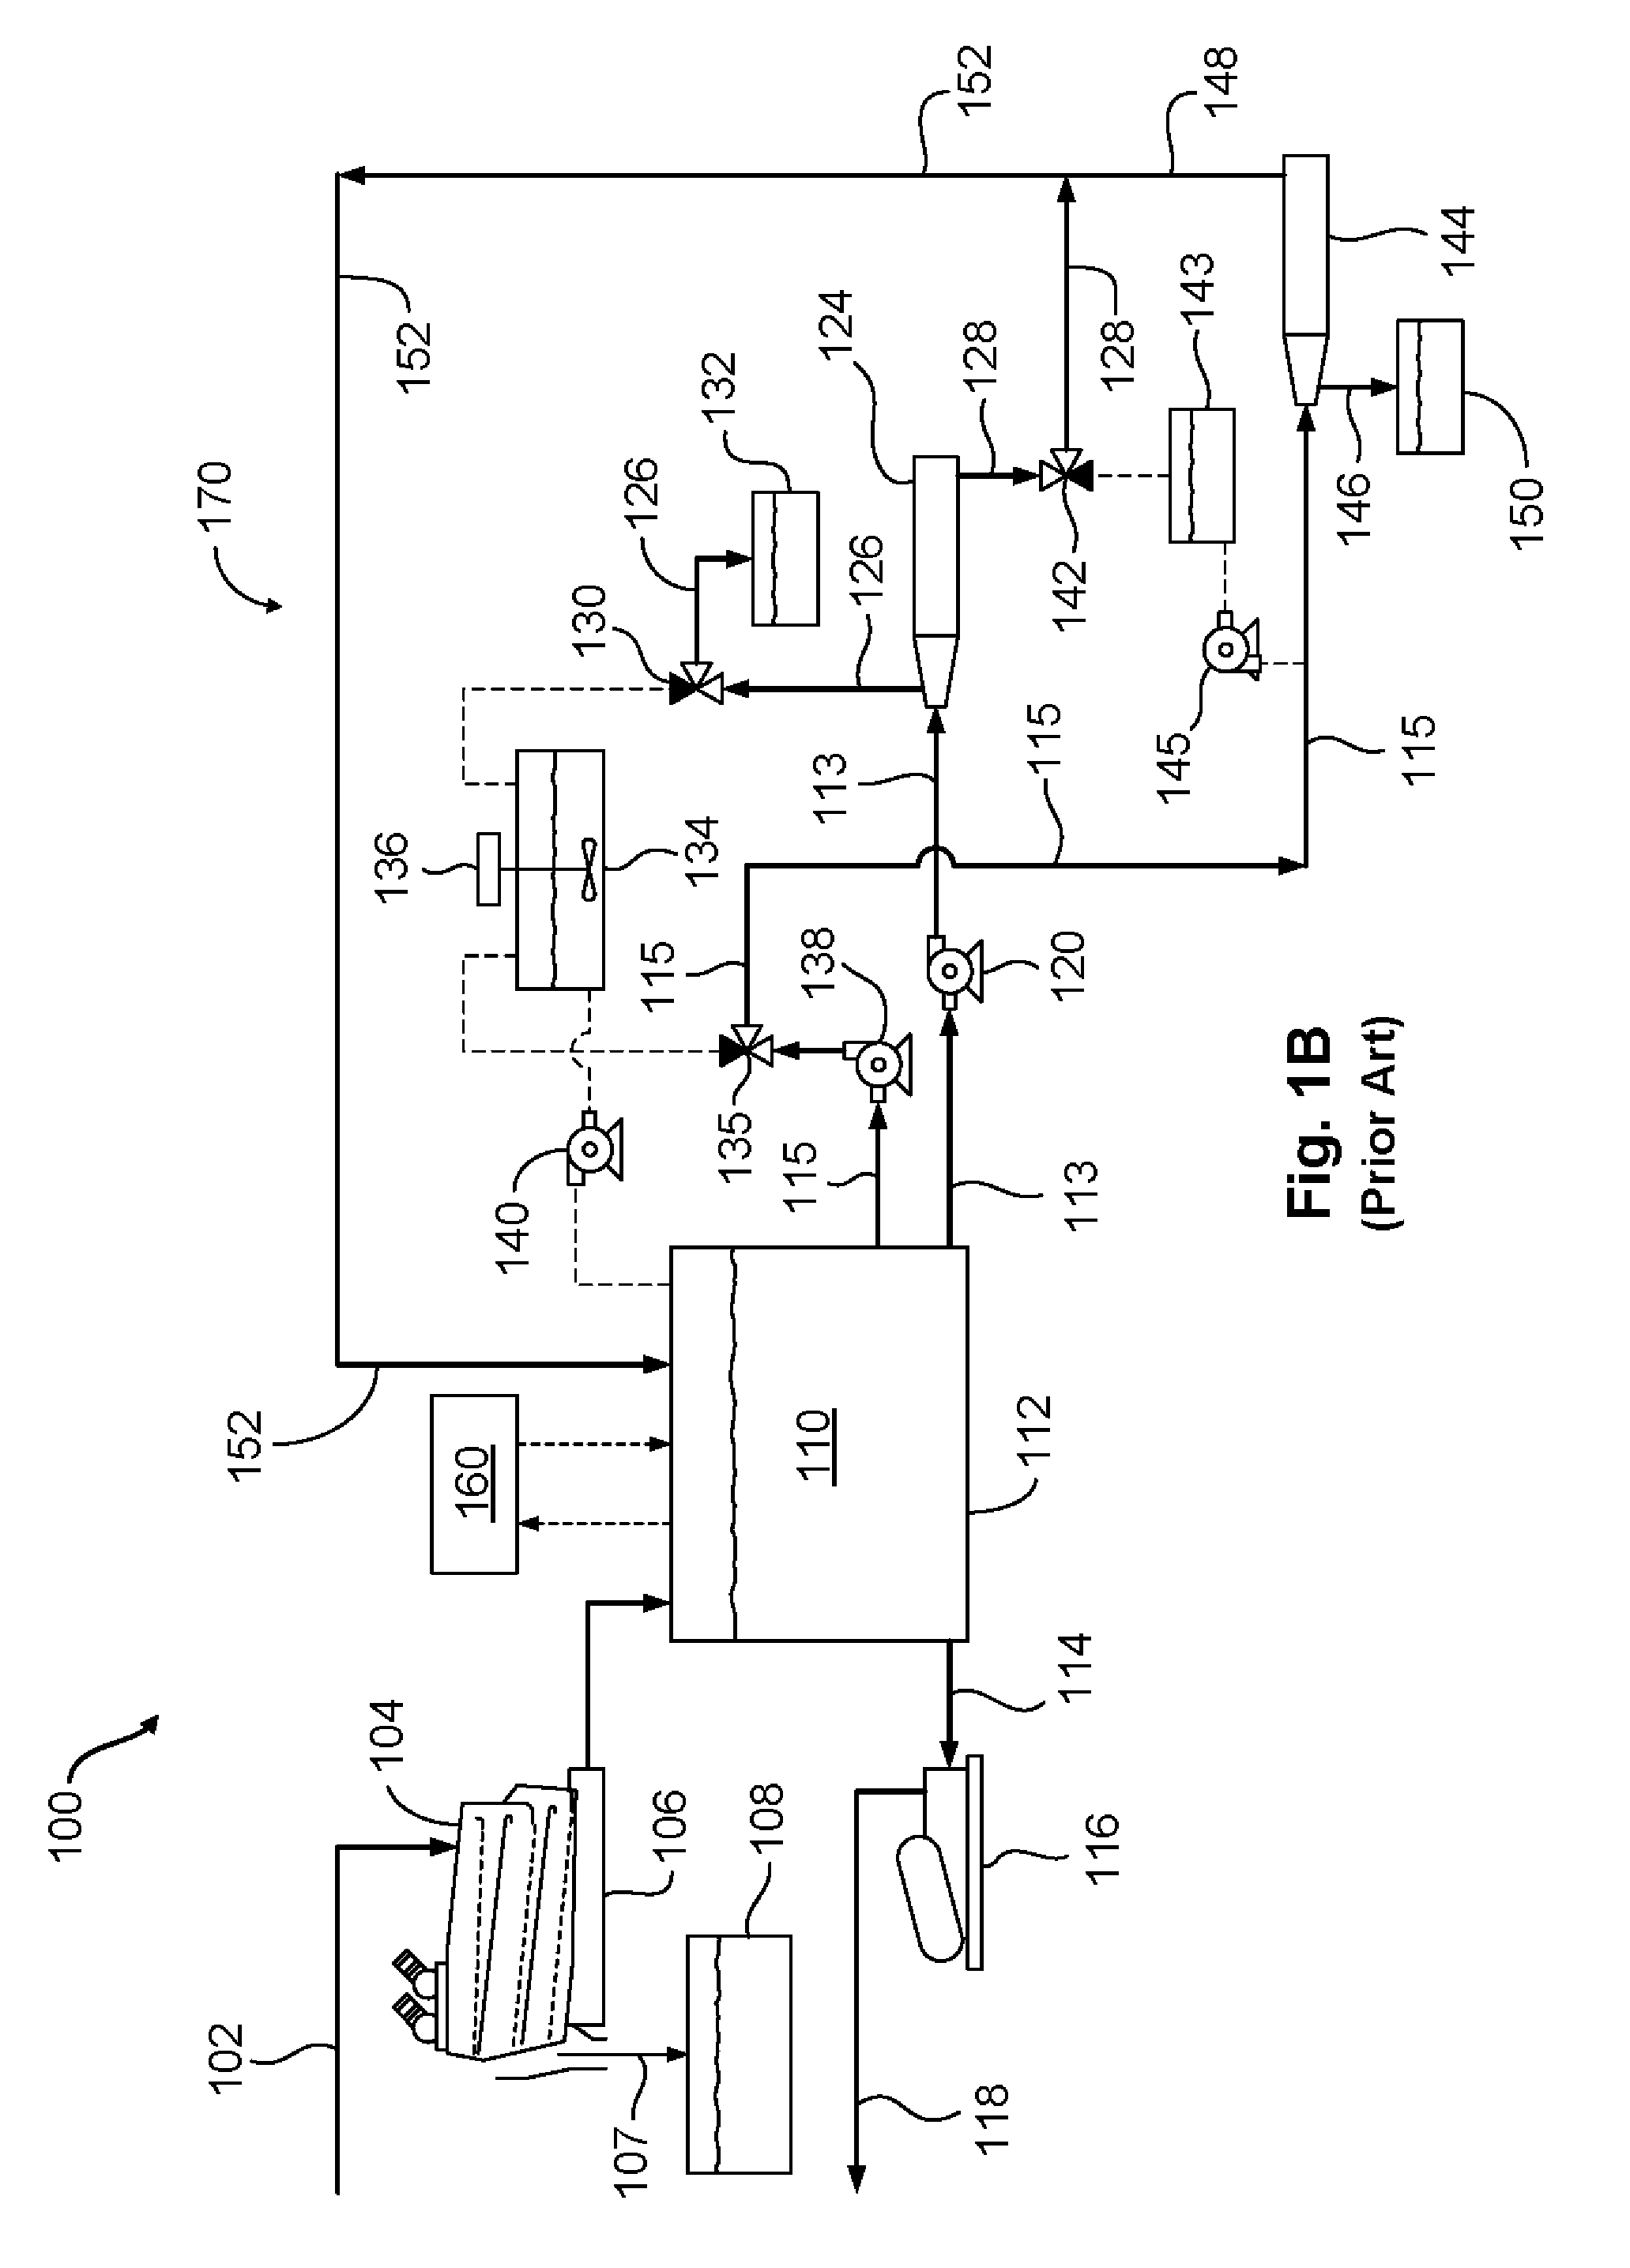 System, apparatus, and method for recovering barite from drilling fluid